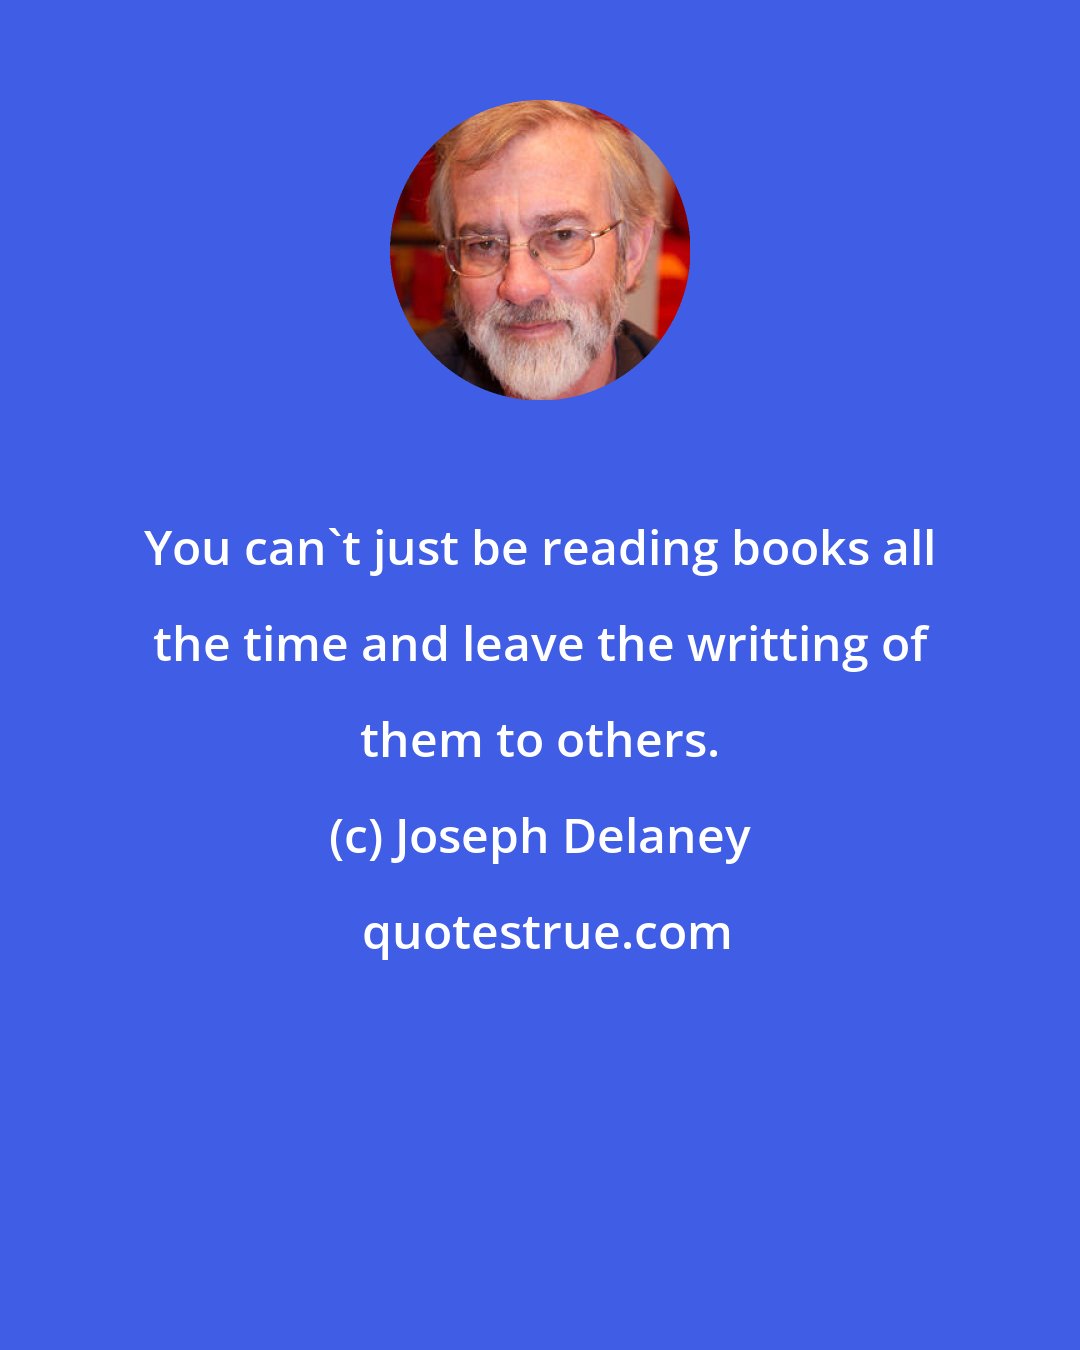 Joseph Delaney: You can't just be reading books all the time and leave the writting of them to others.